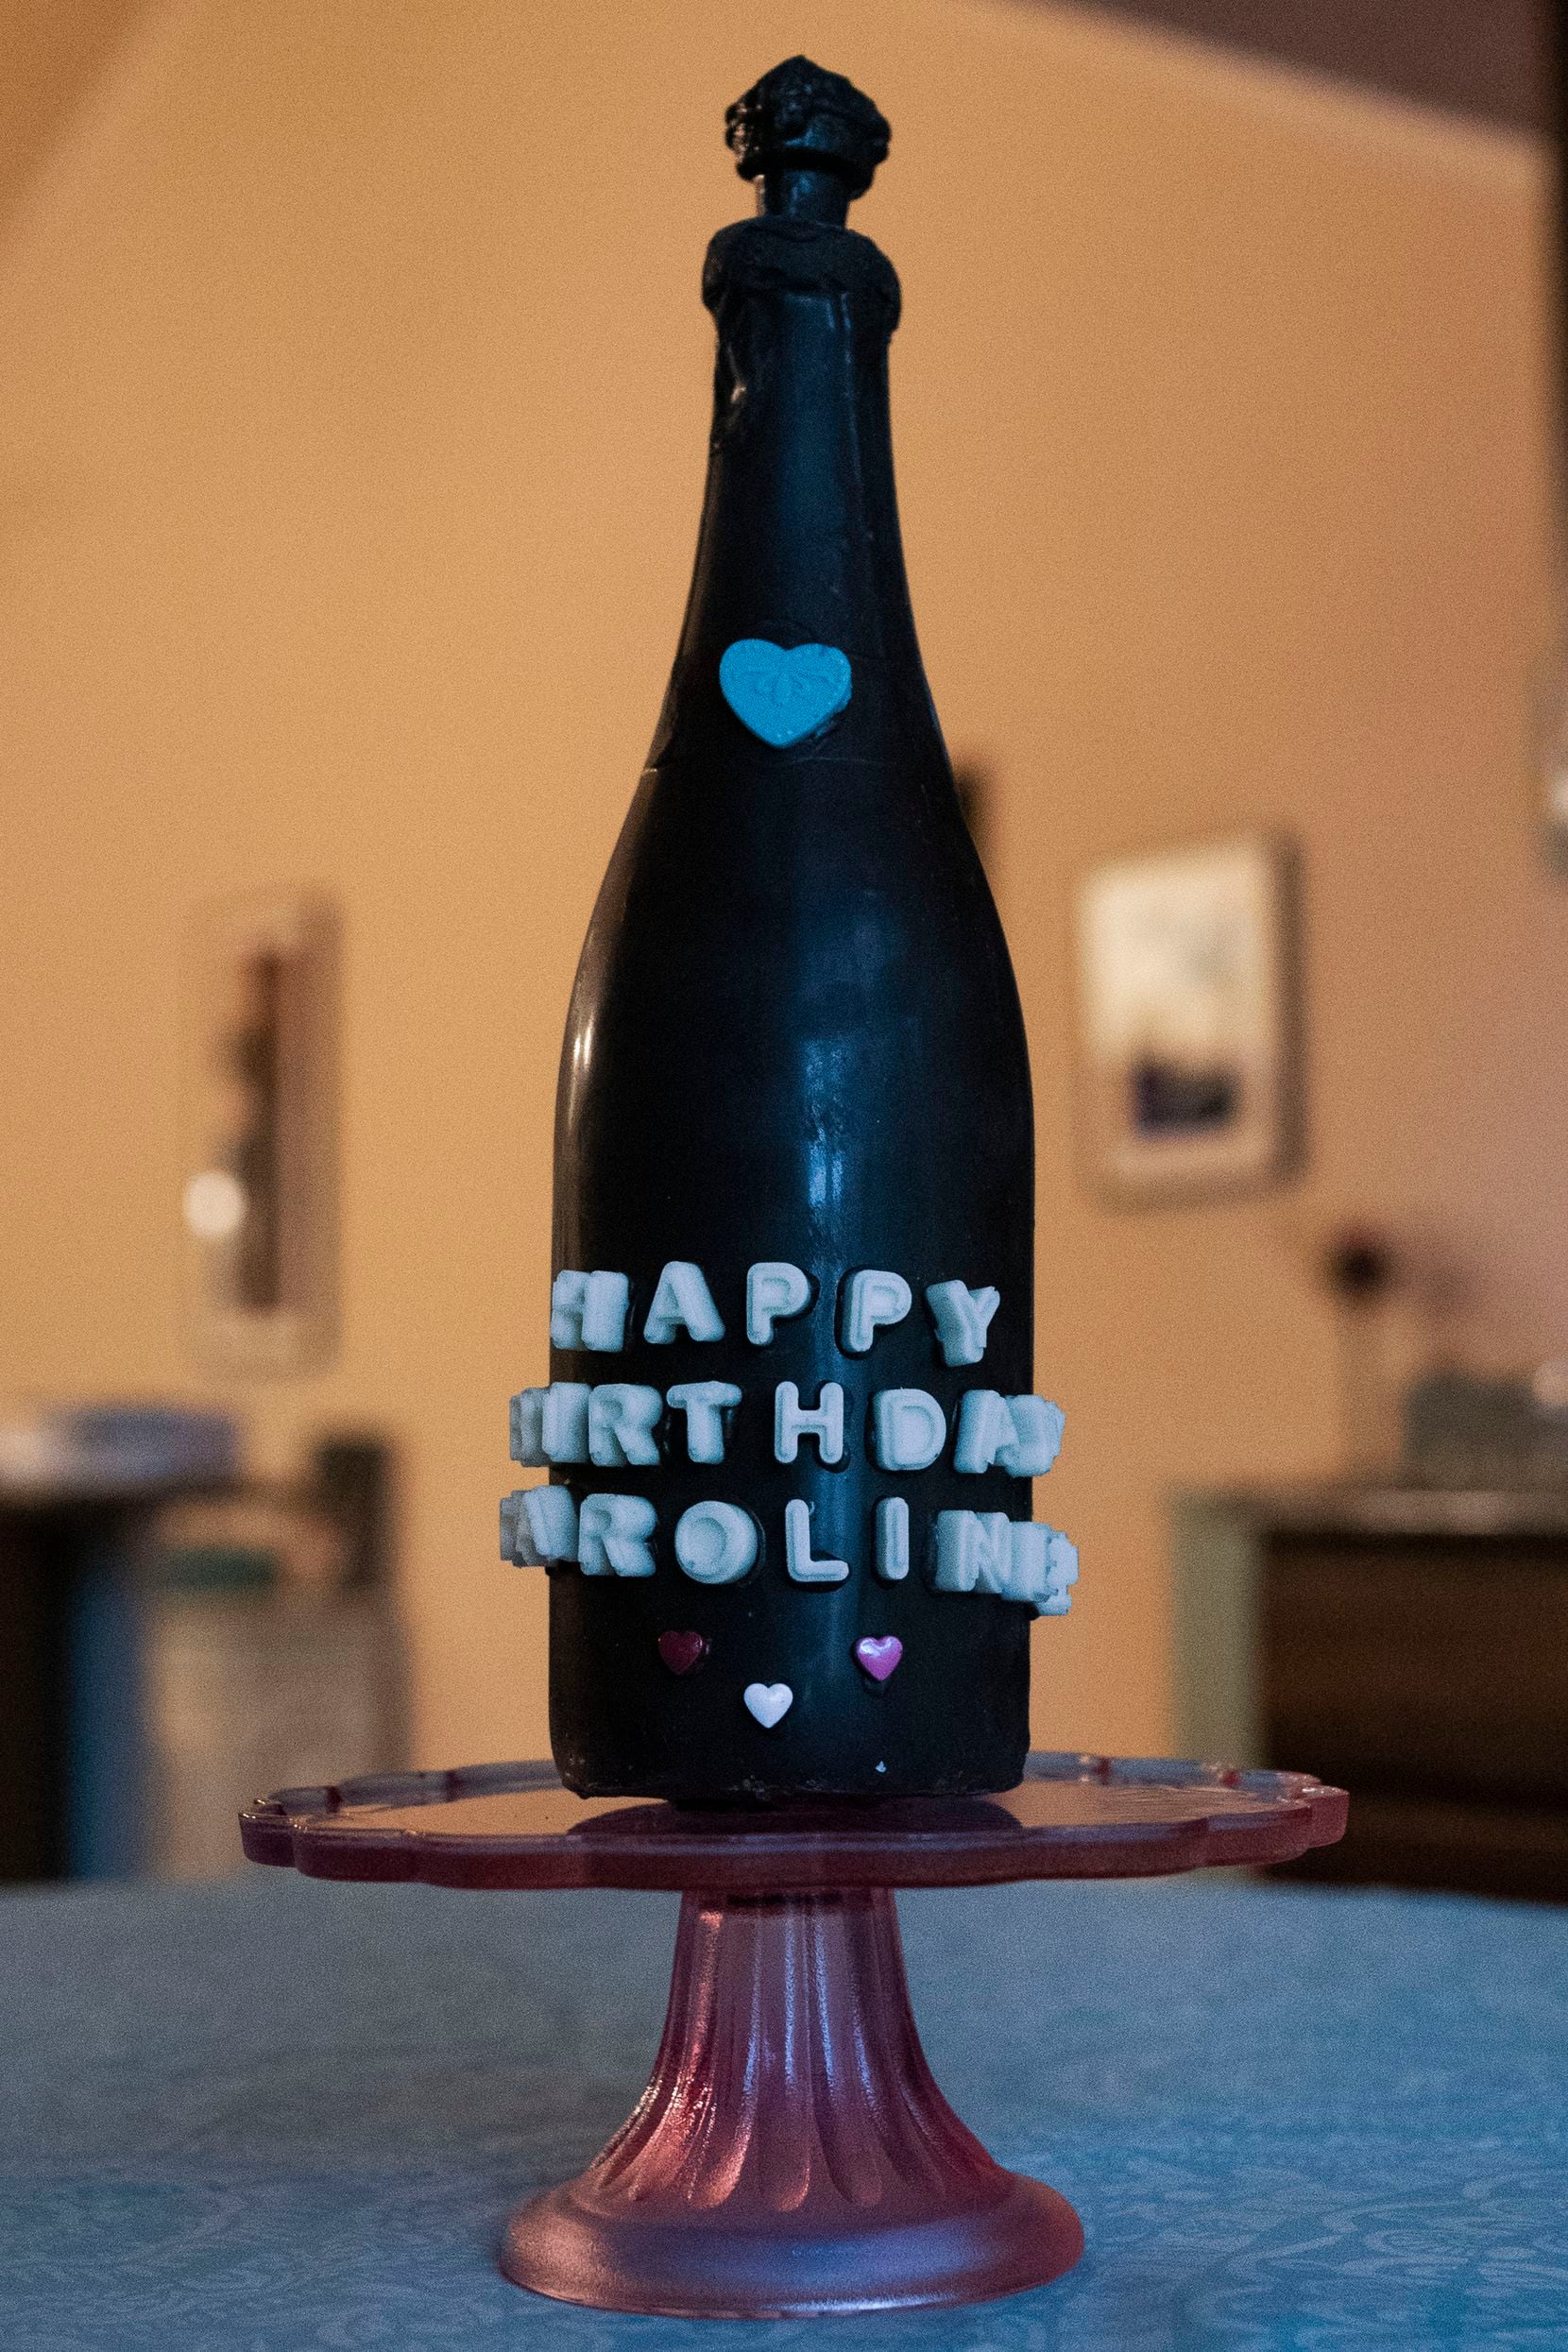 A chocolate wine bottle is one of the many items owner Jill Baethge, of Kaboom Chocolaka, makes for people to smash as they celebrate events.